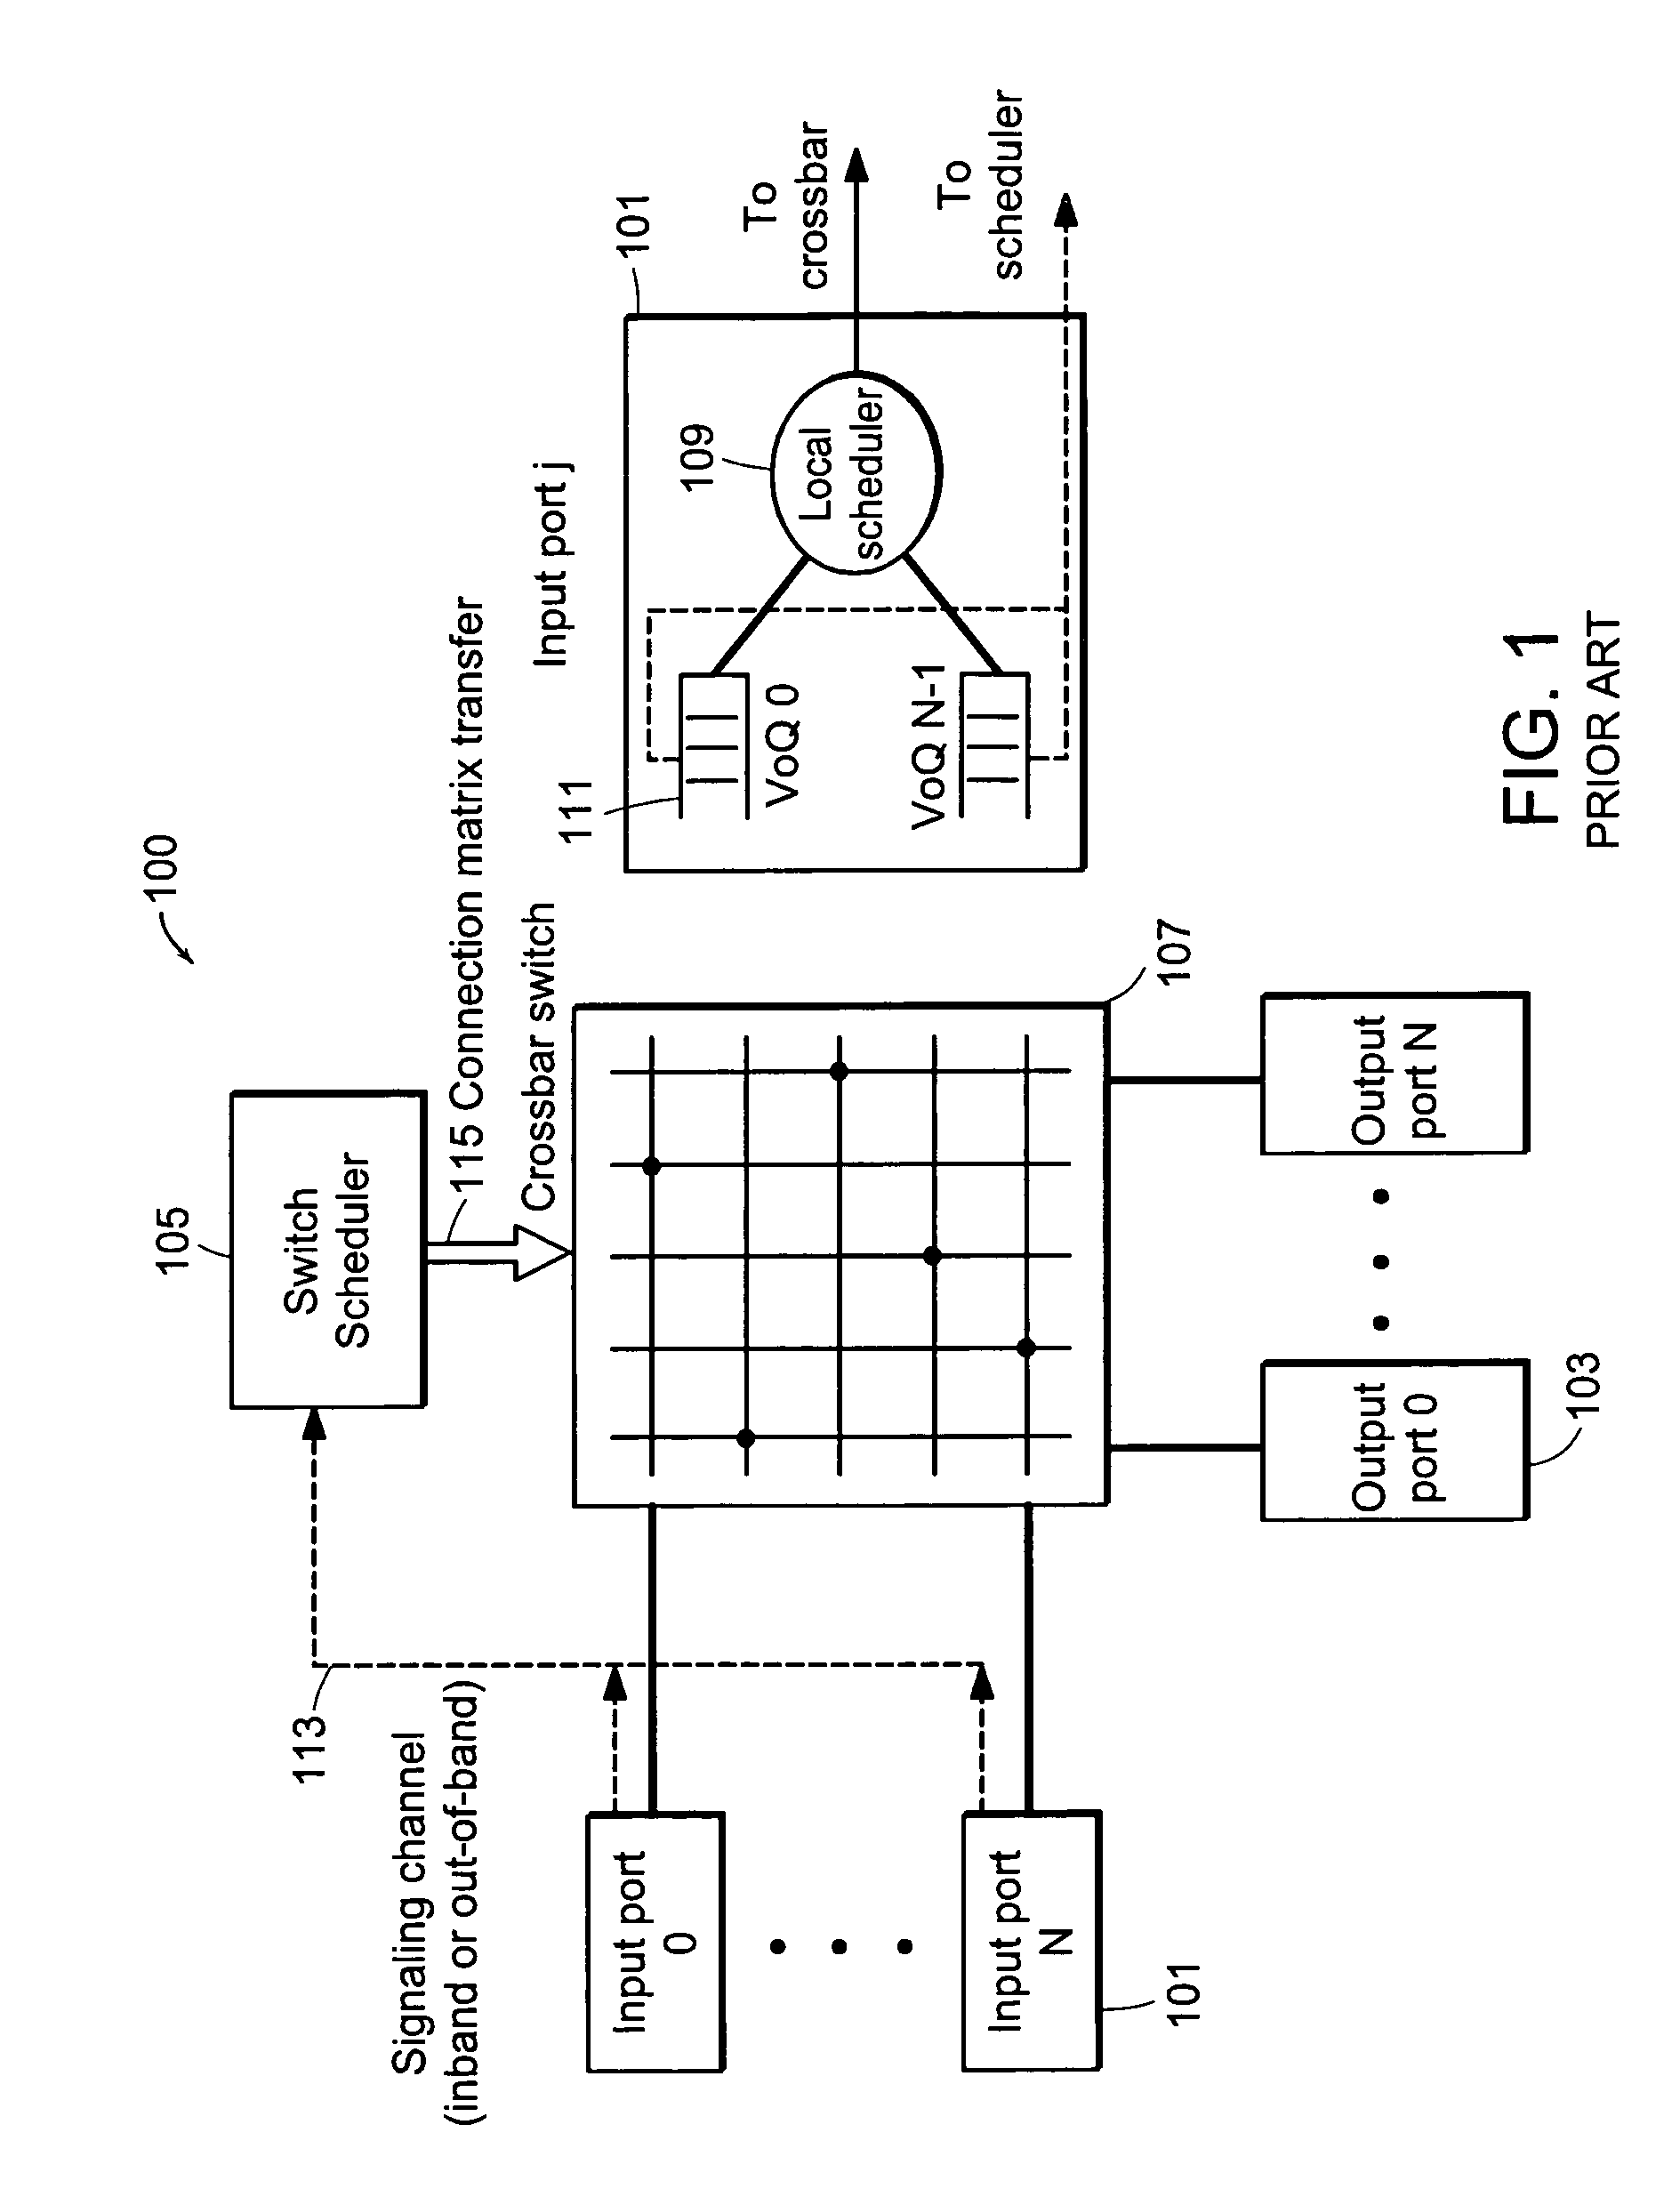 Weighted fair share scheduler for large input-buffered high-speed cross-point packet/cell switches